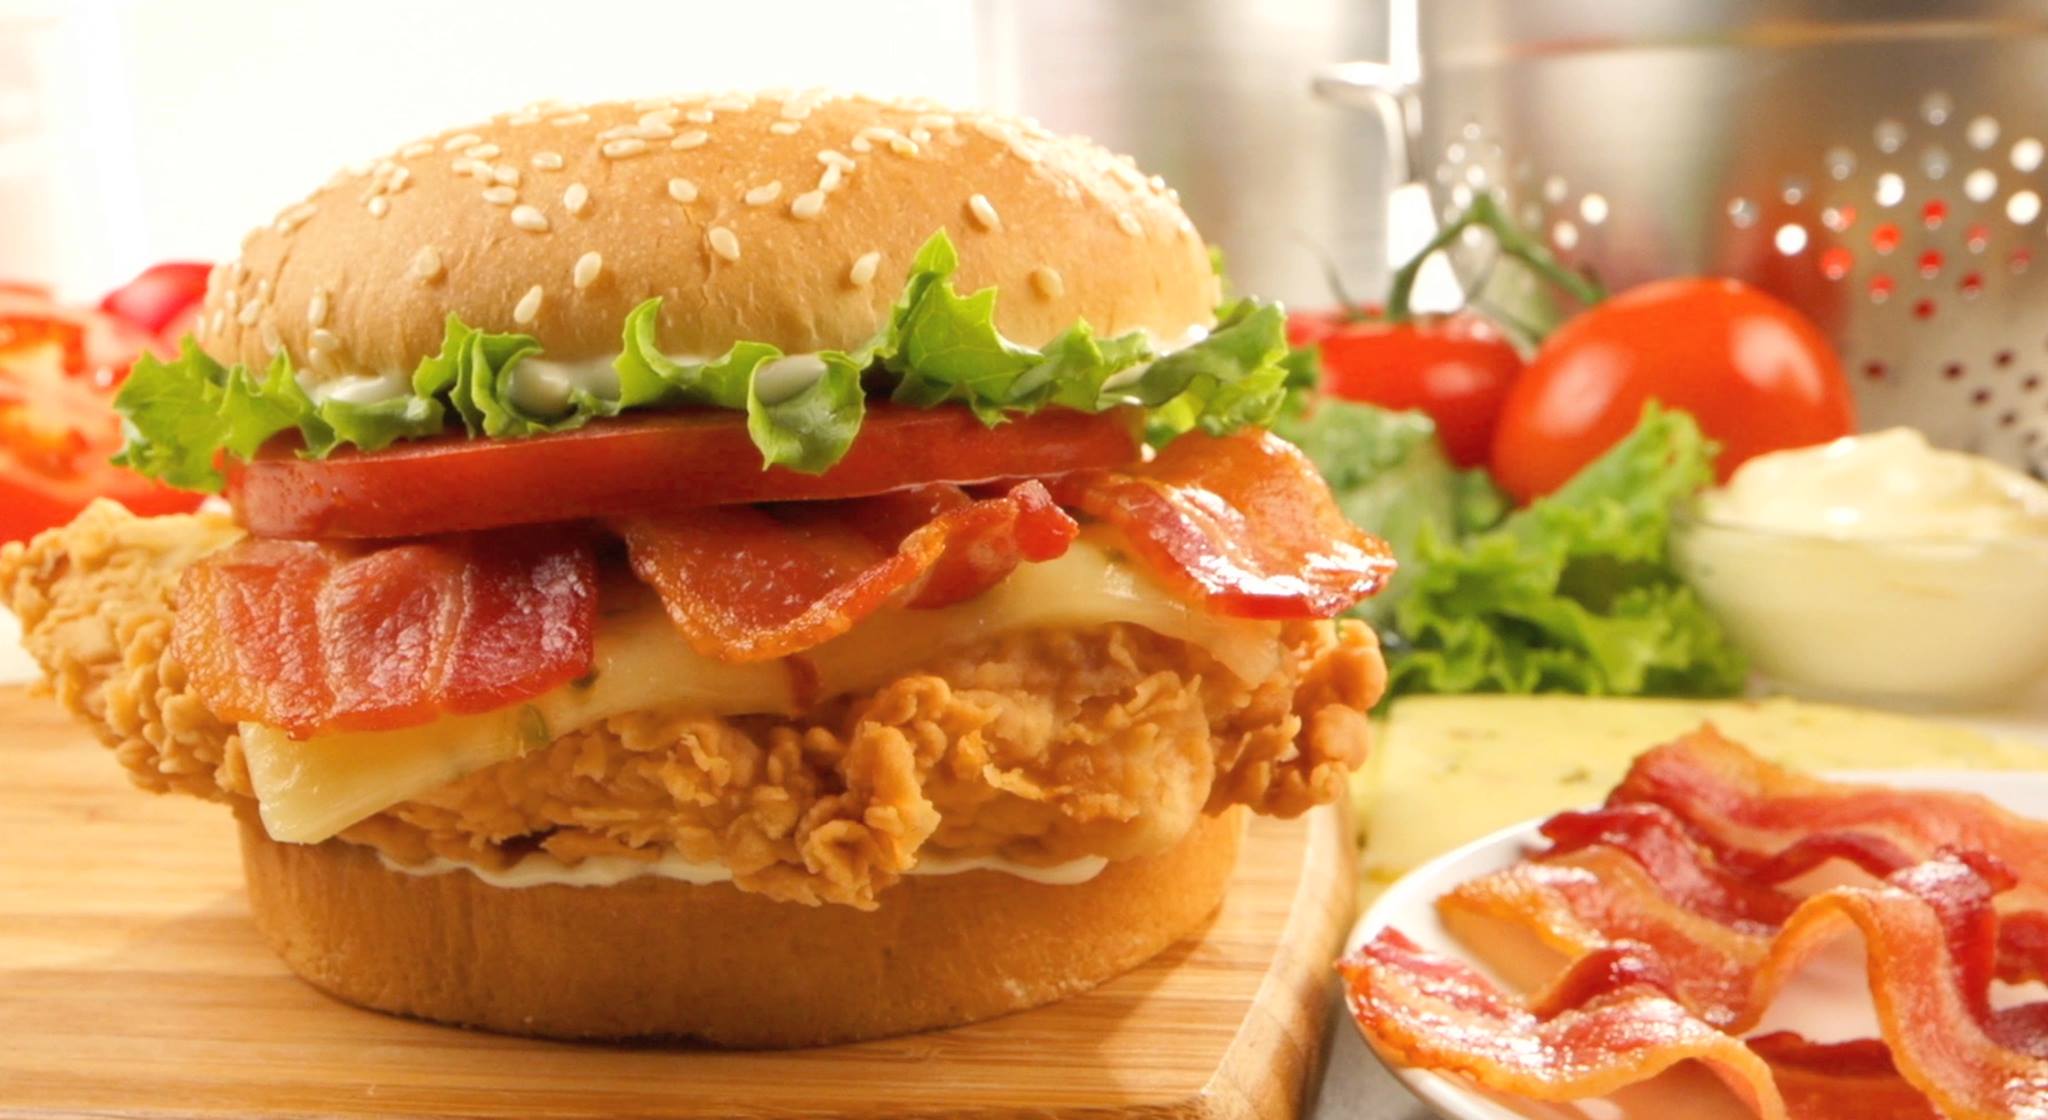 A chicken and bacon burger from Texas Chicken